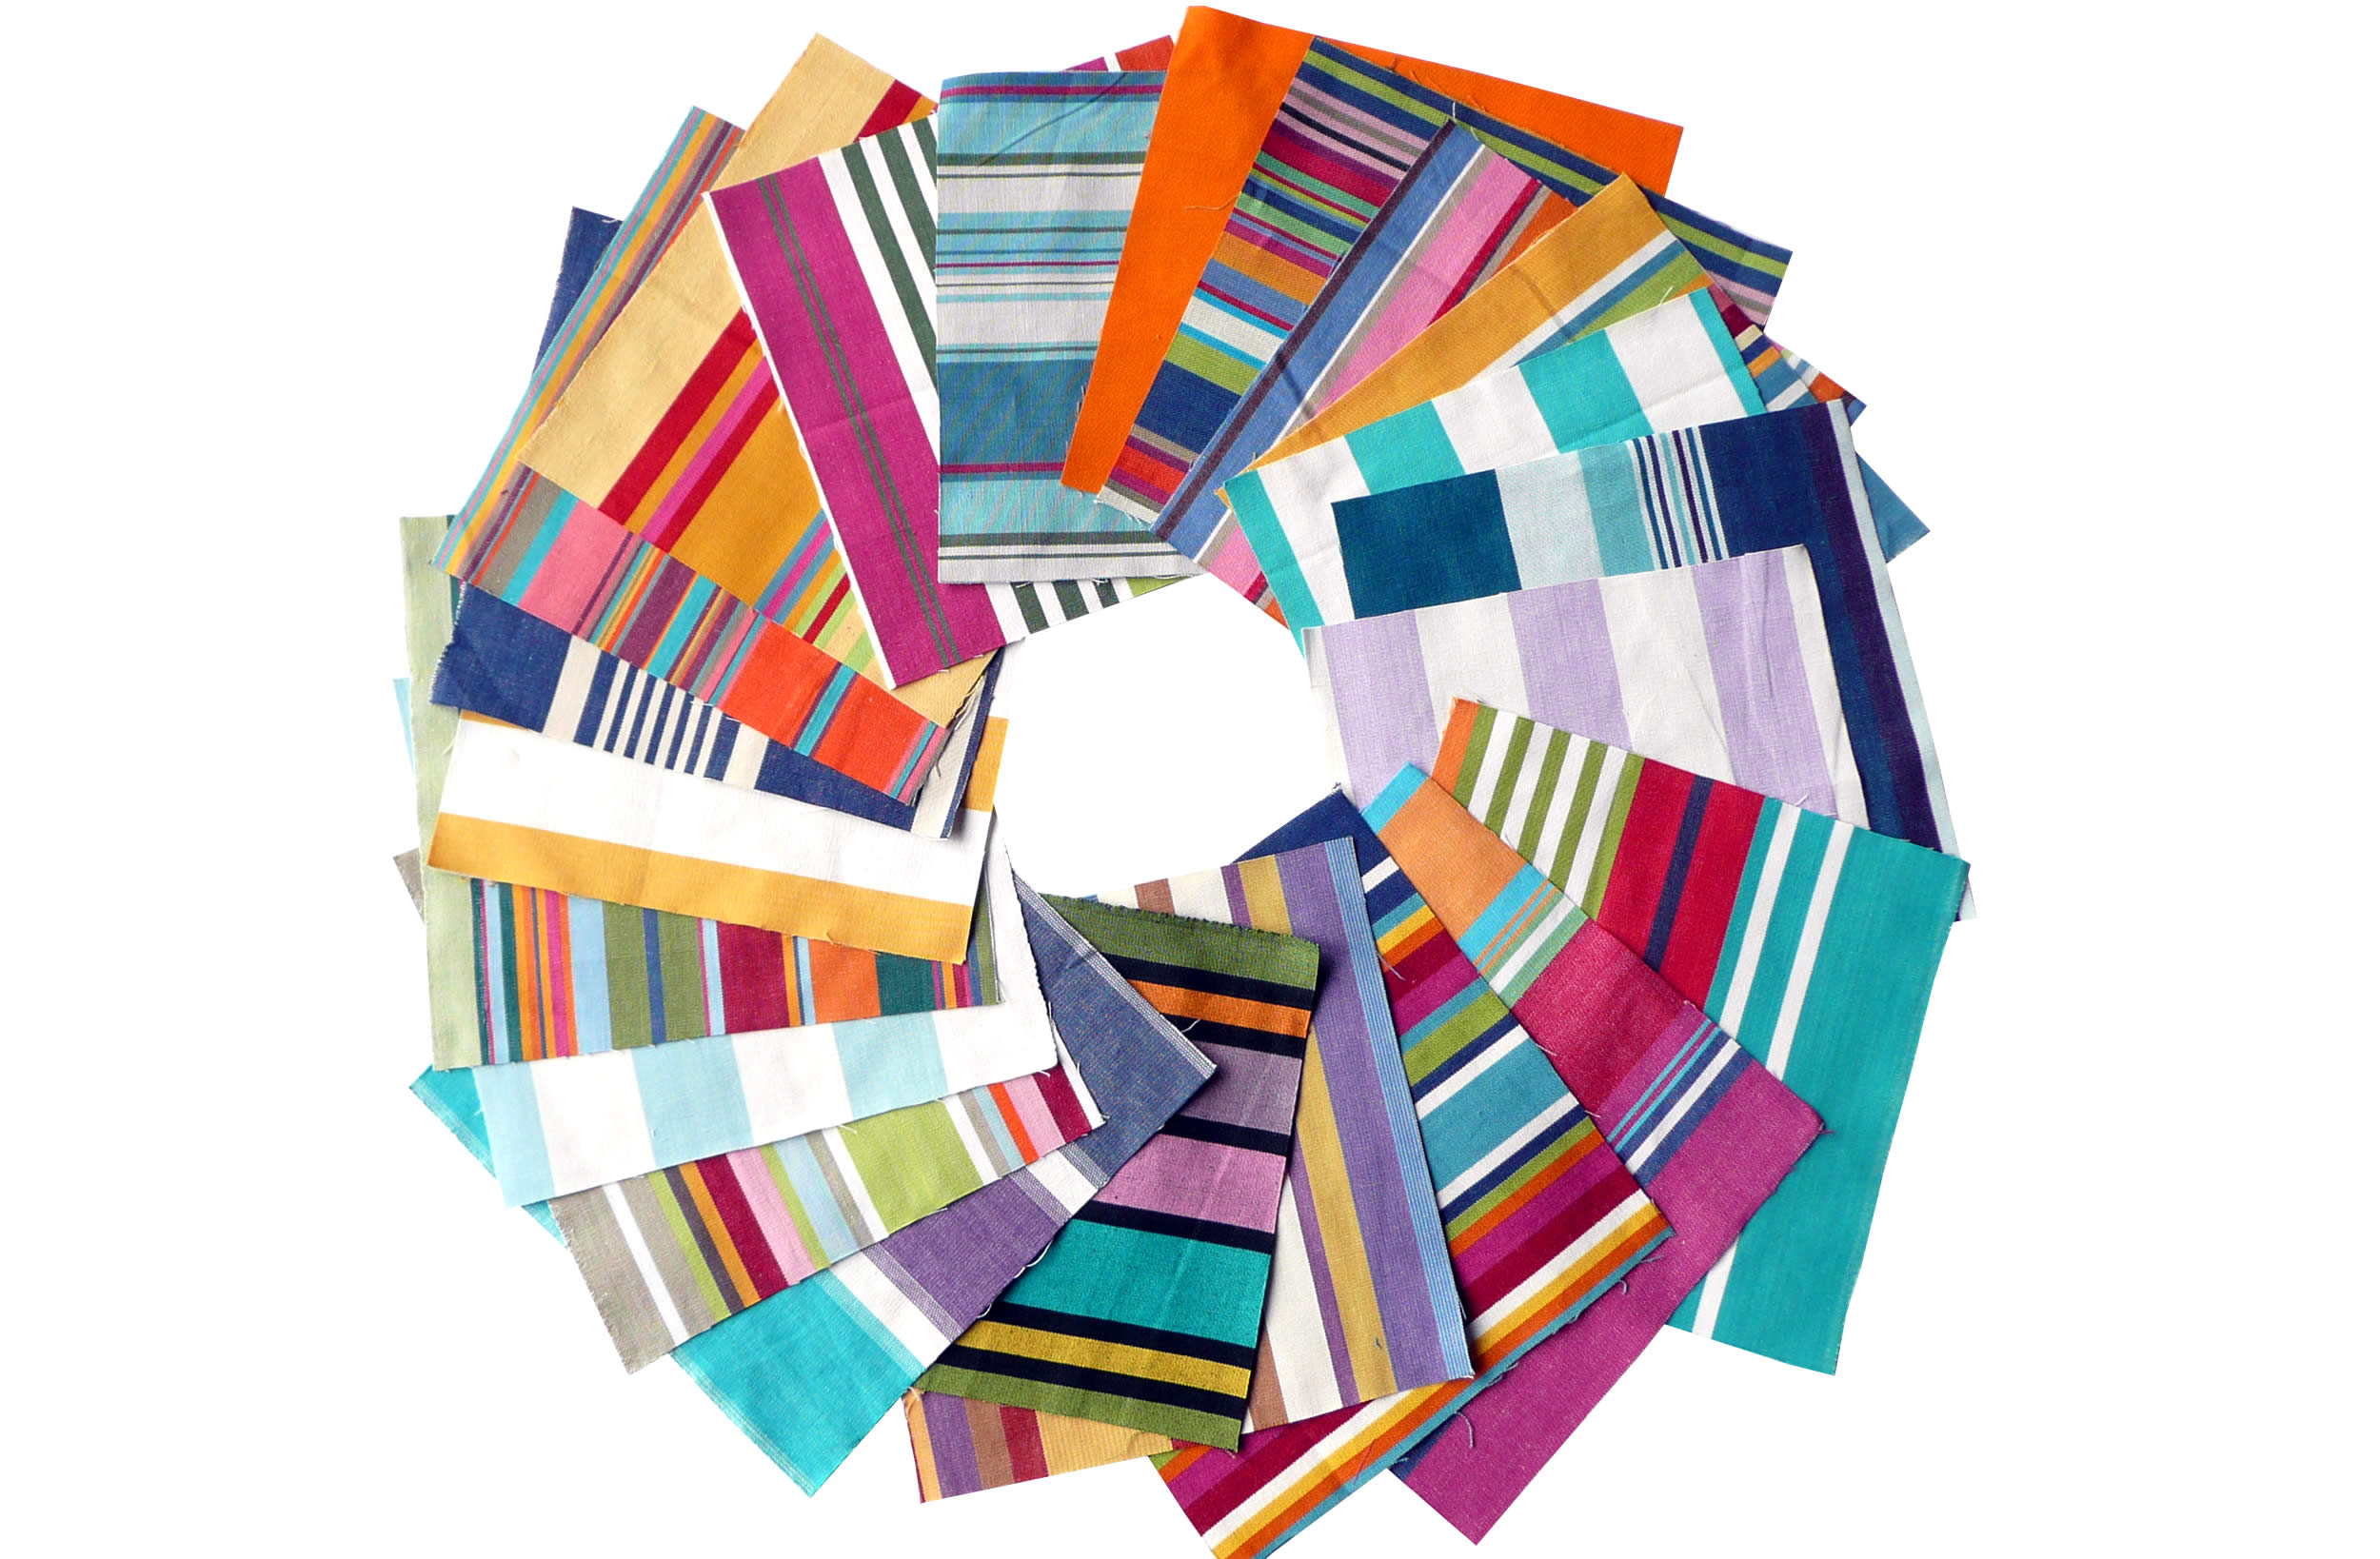 Bumper Pack of Striped Cotton Fabric Squares for Patchwork